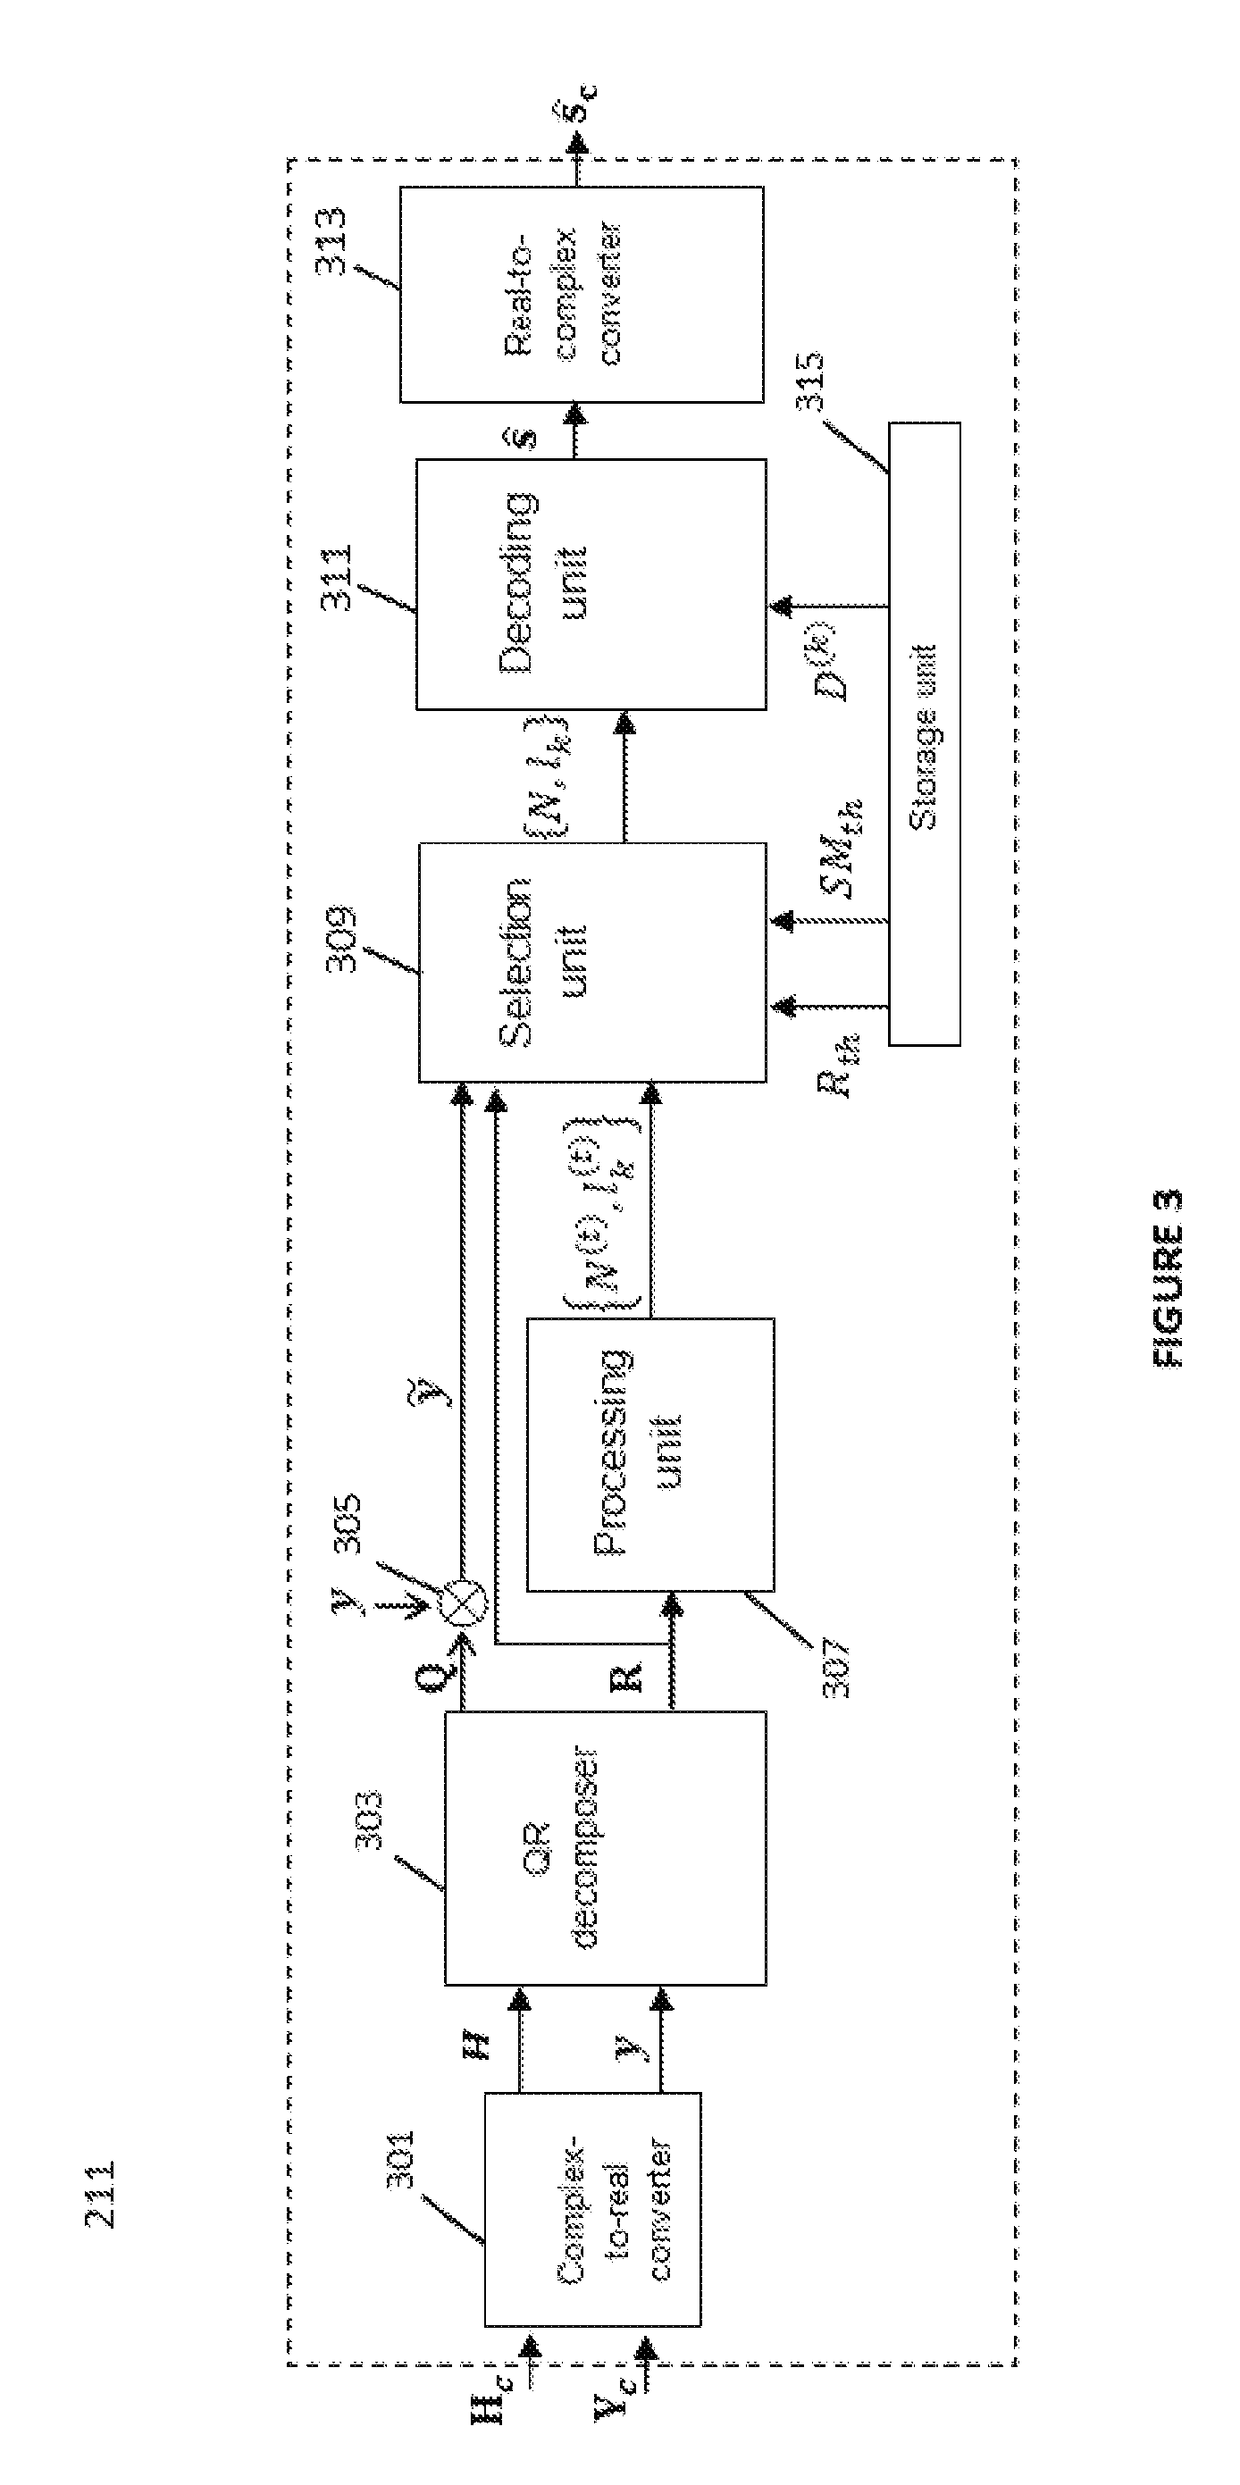 Methods and devices for sub-block decoding data signals